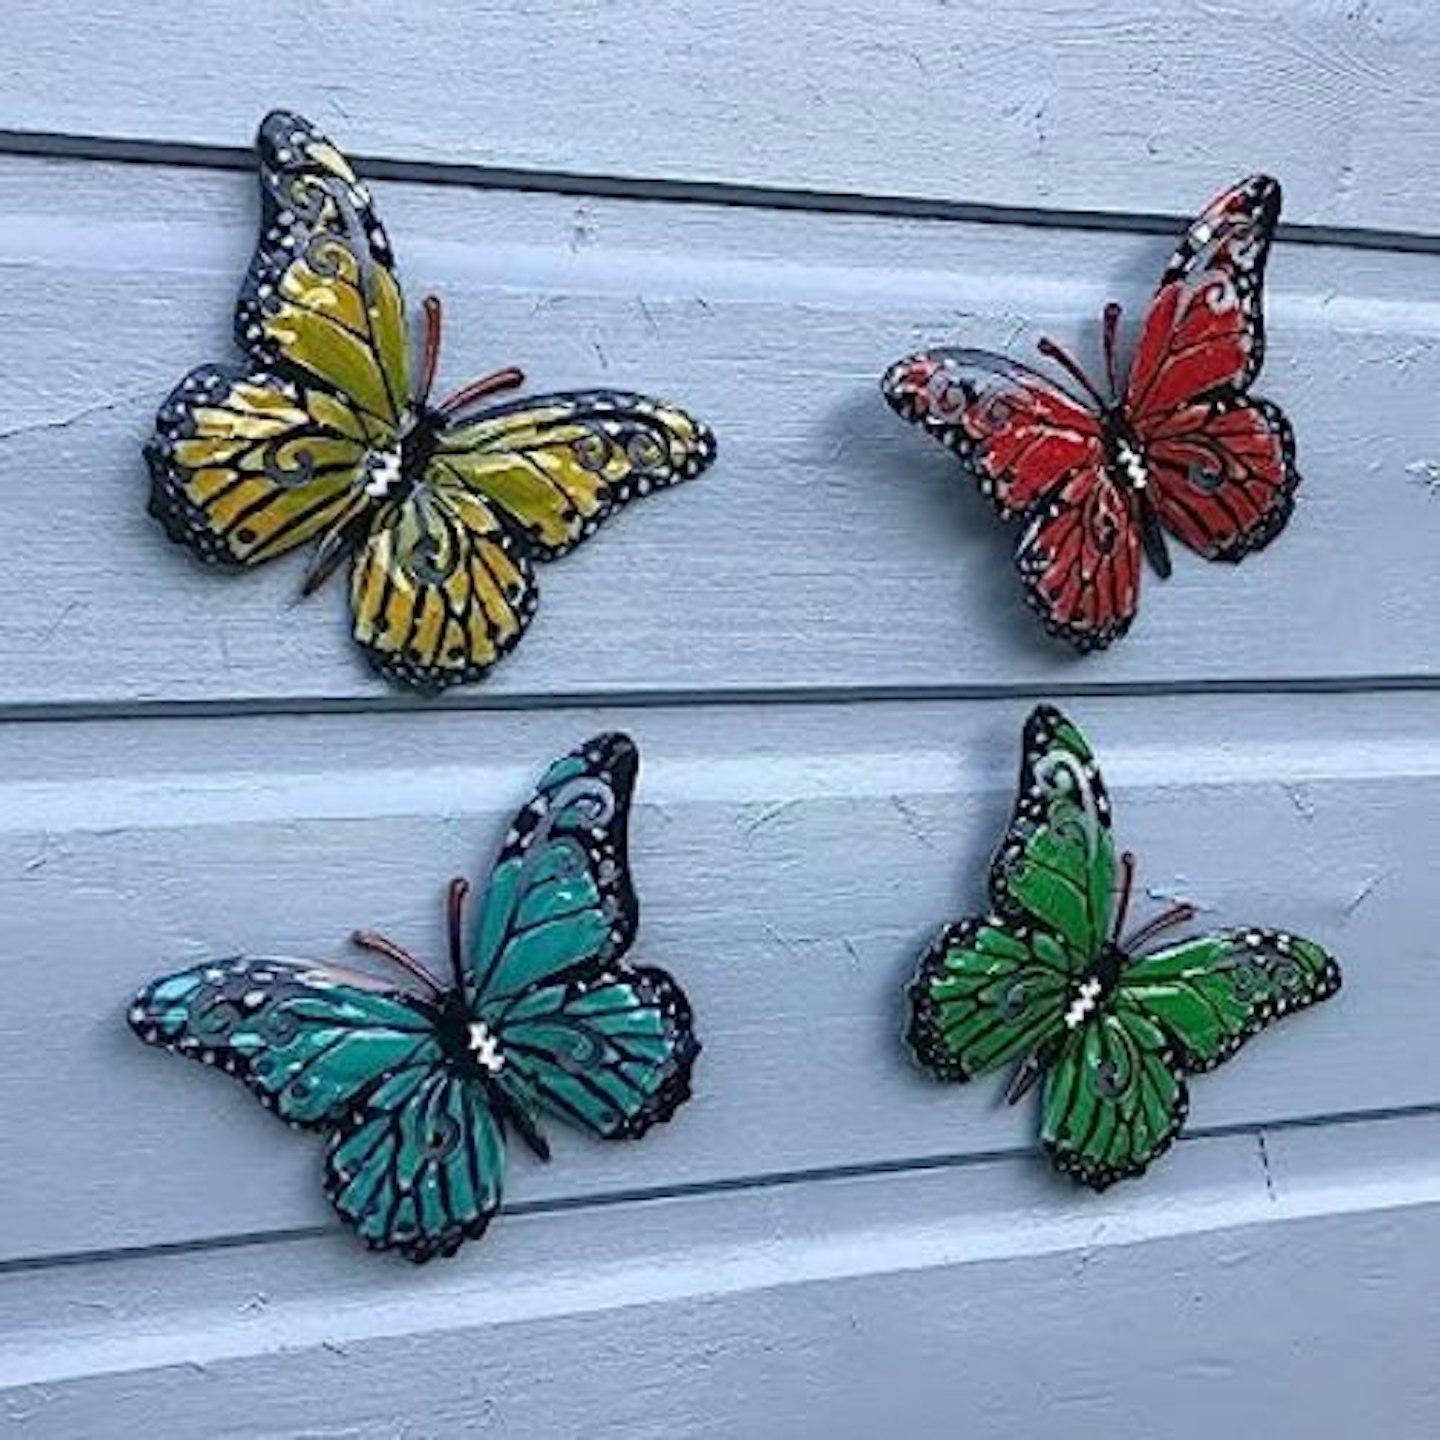 Maggy Kay Gifts Decorative Garden Butterfly Fence Hangers